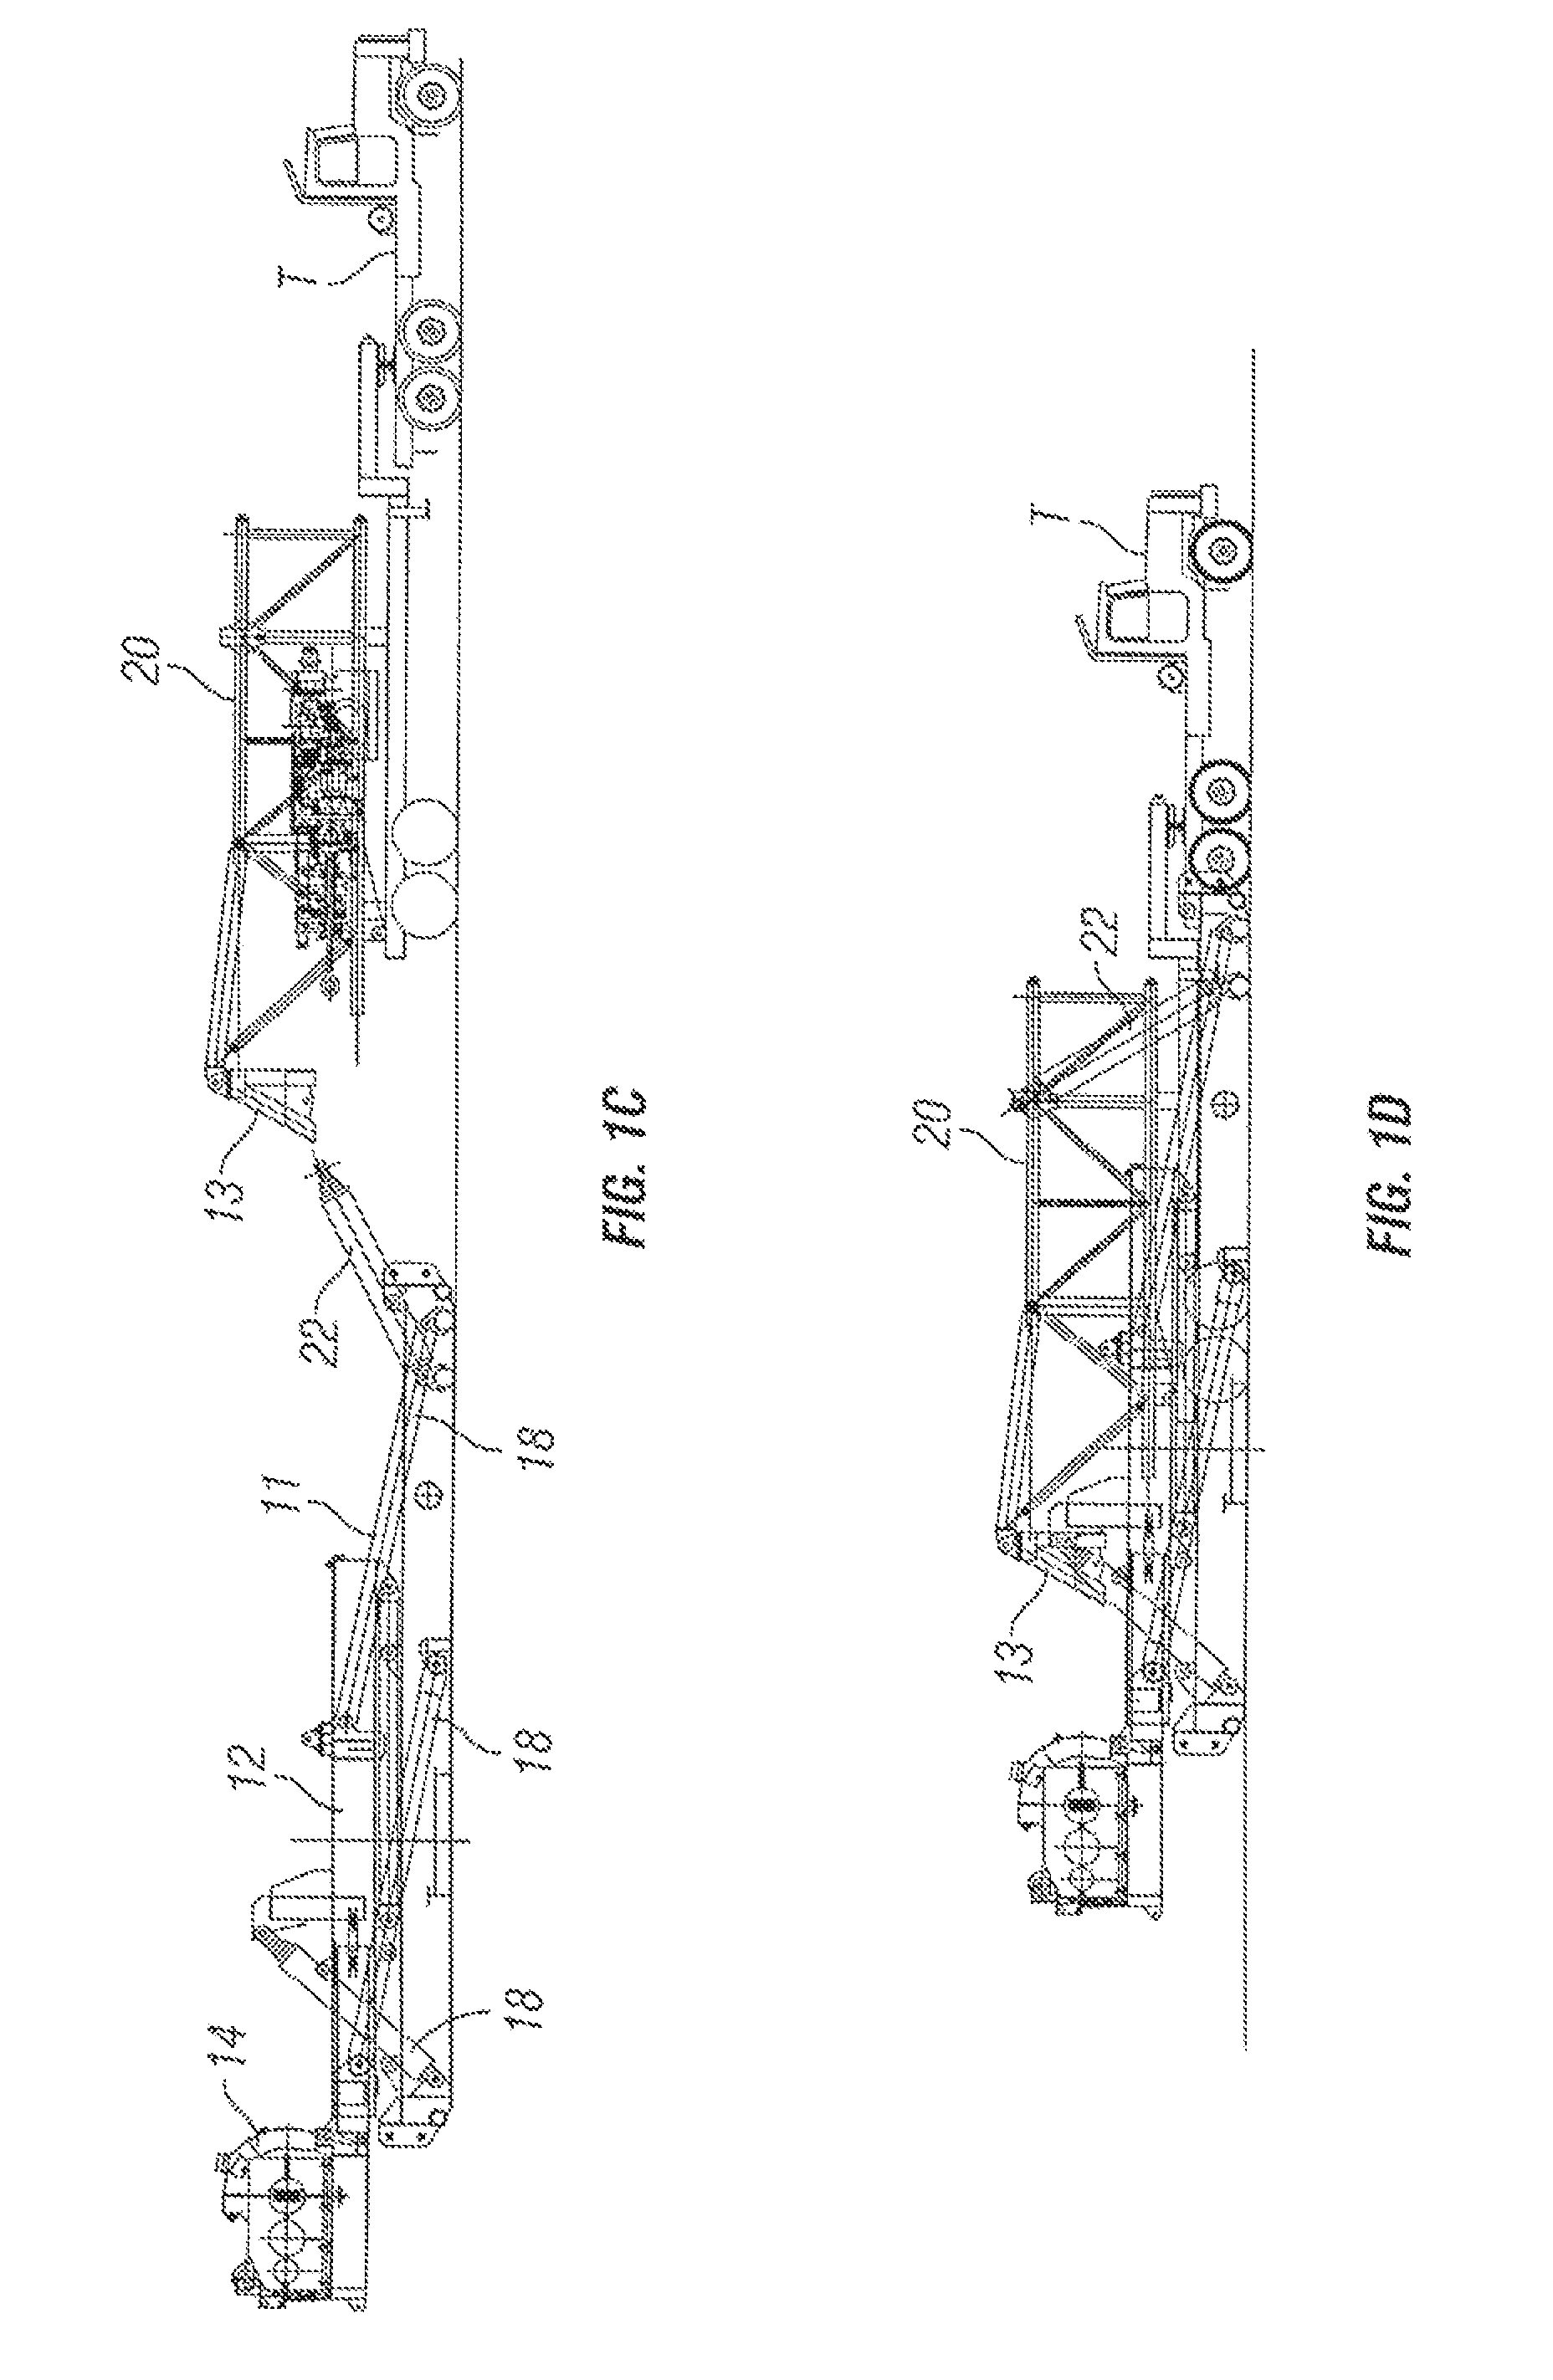 Pinned structural connection using a pin and plug arrangement